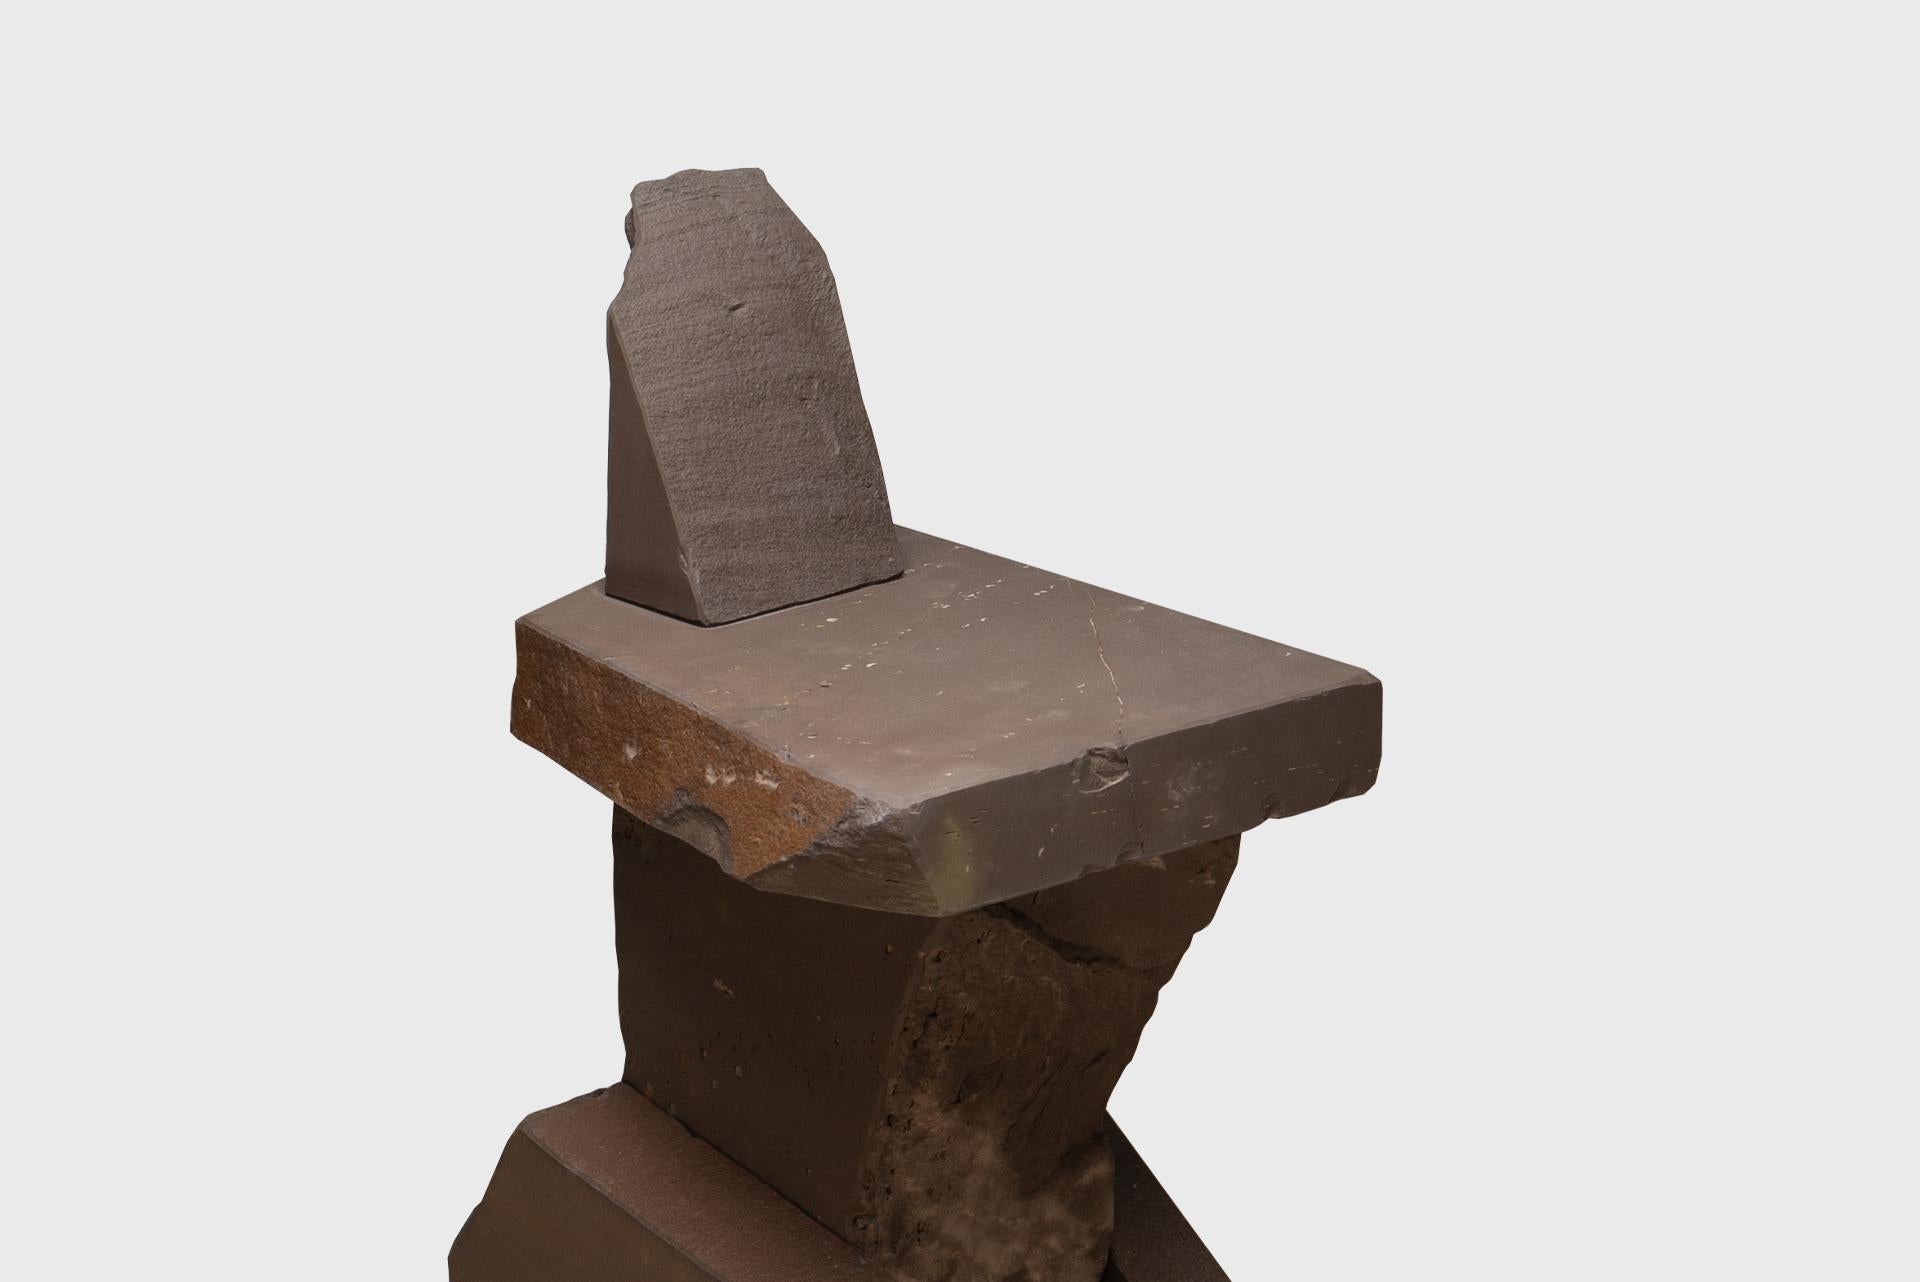 Contemporary Natural Chair 17, Graywacke Offcut Gray Stone, Carsten in der Elst For Sale 7